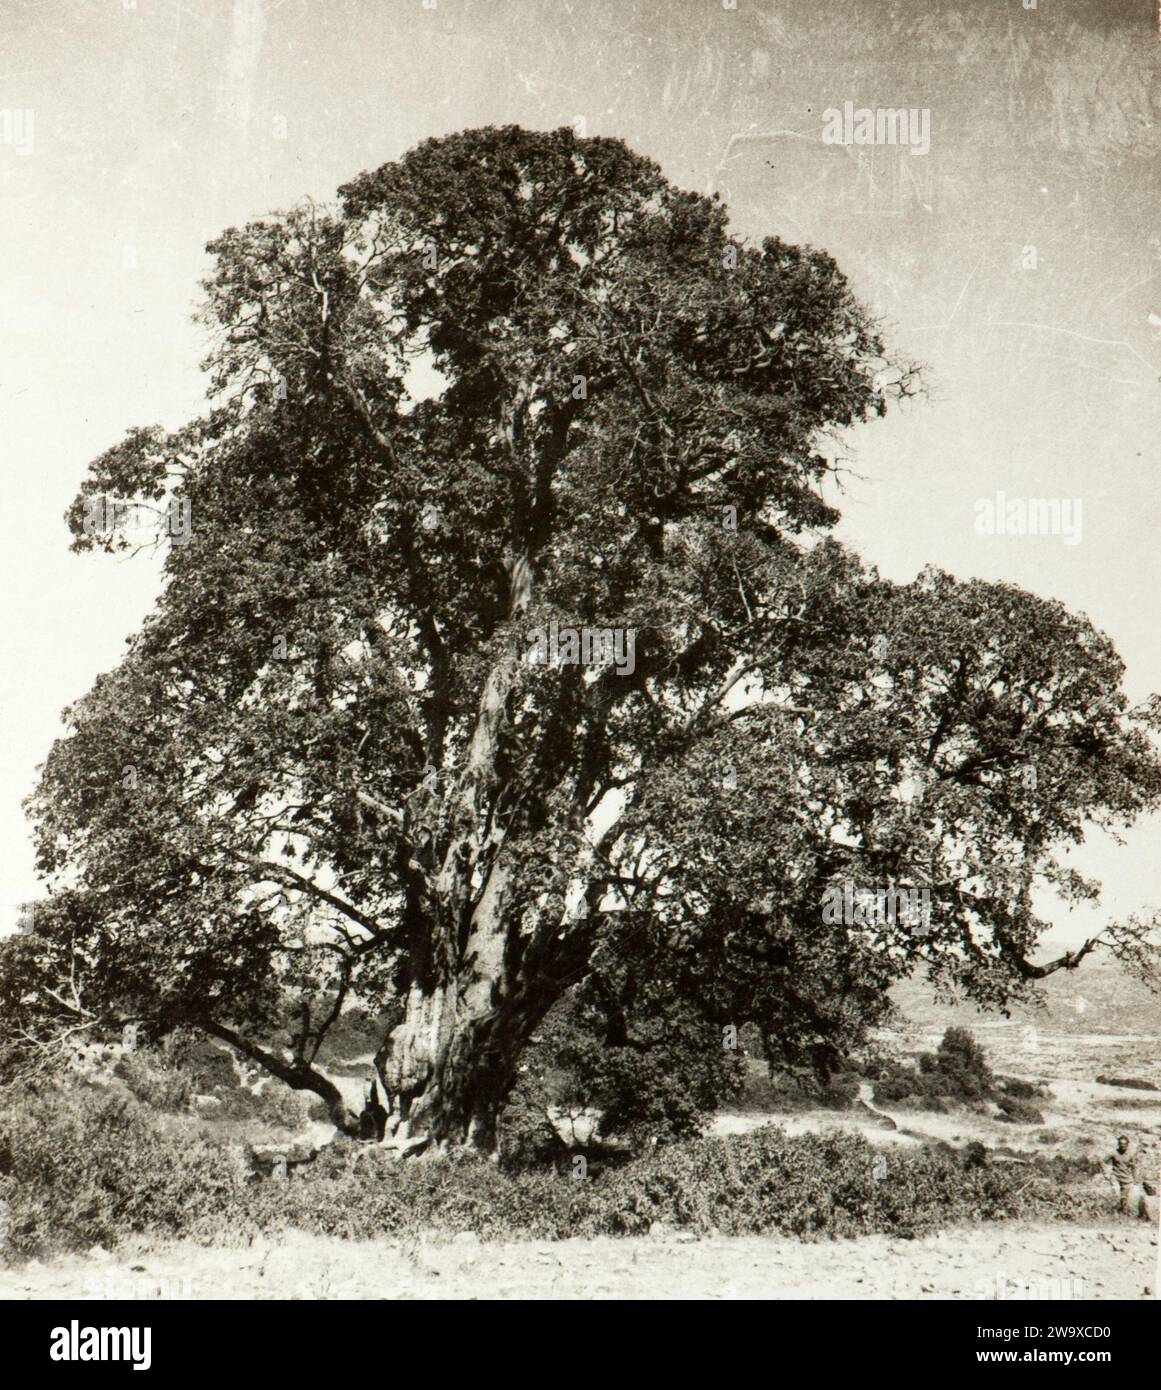 A big tree in Ethiopia a real 'natural monument' in mid thirties during italian colonial occupation. Stock Photo